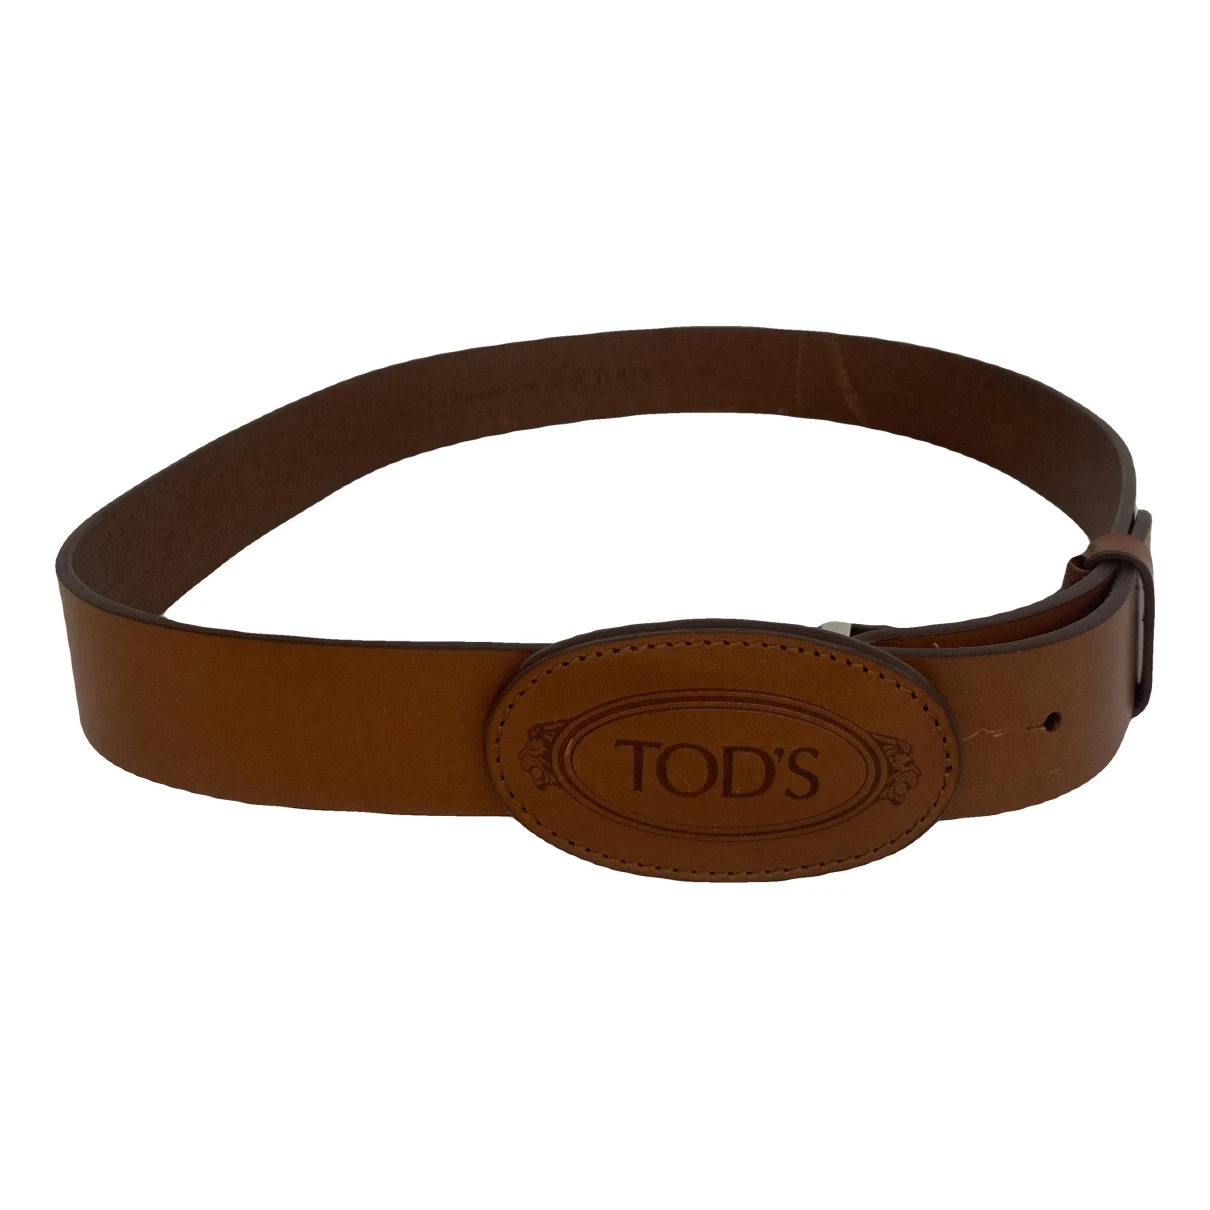 accessories Tod's belts for Male Leather 90 cm. Used condition